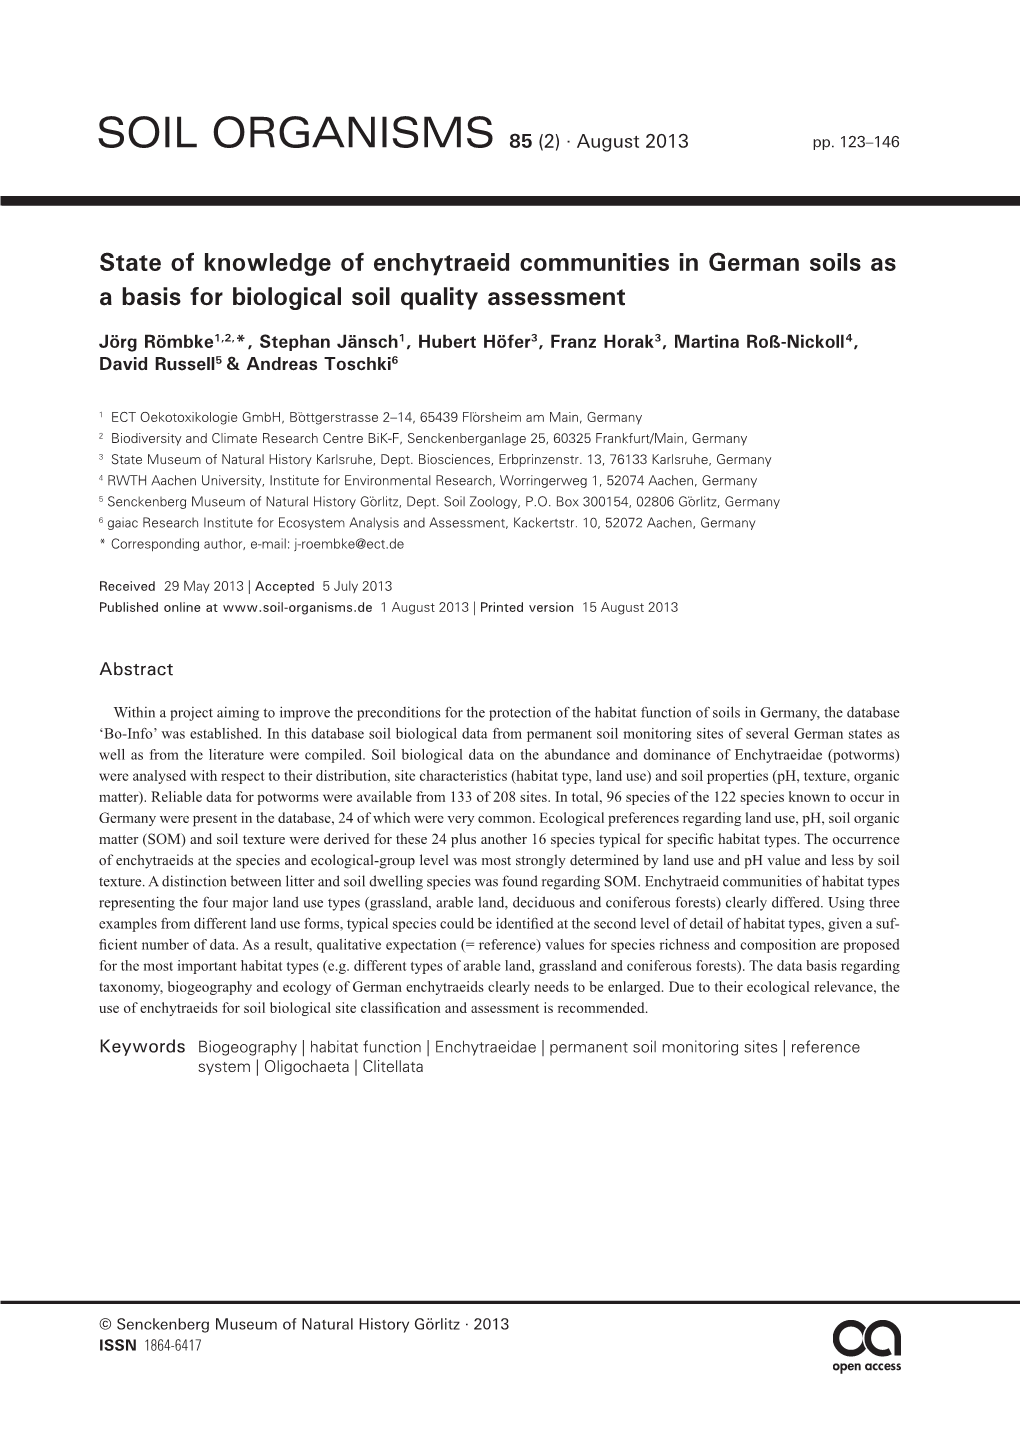 State of Knowledge of Enchytraeid Communities in German Soils As a Basis for Biological Soil Quality Assessment